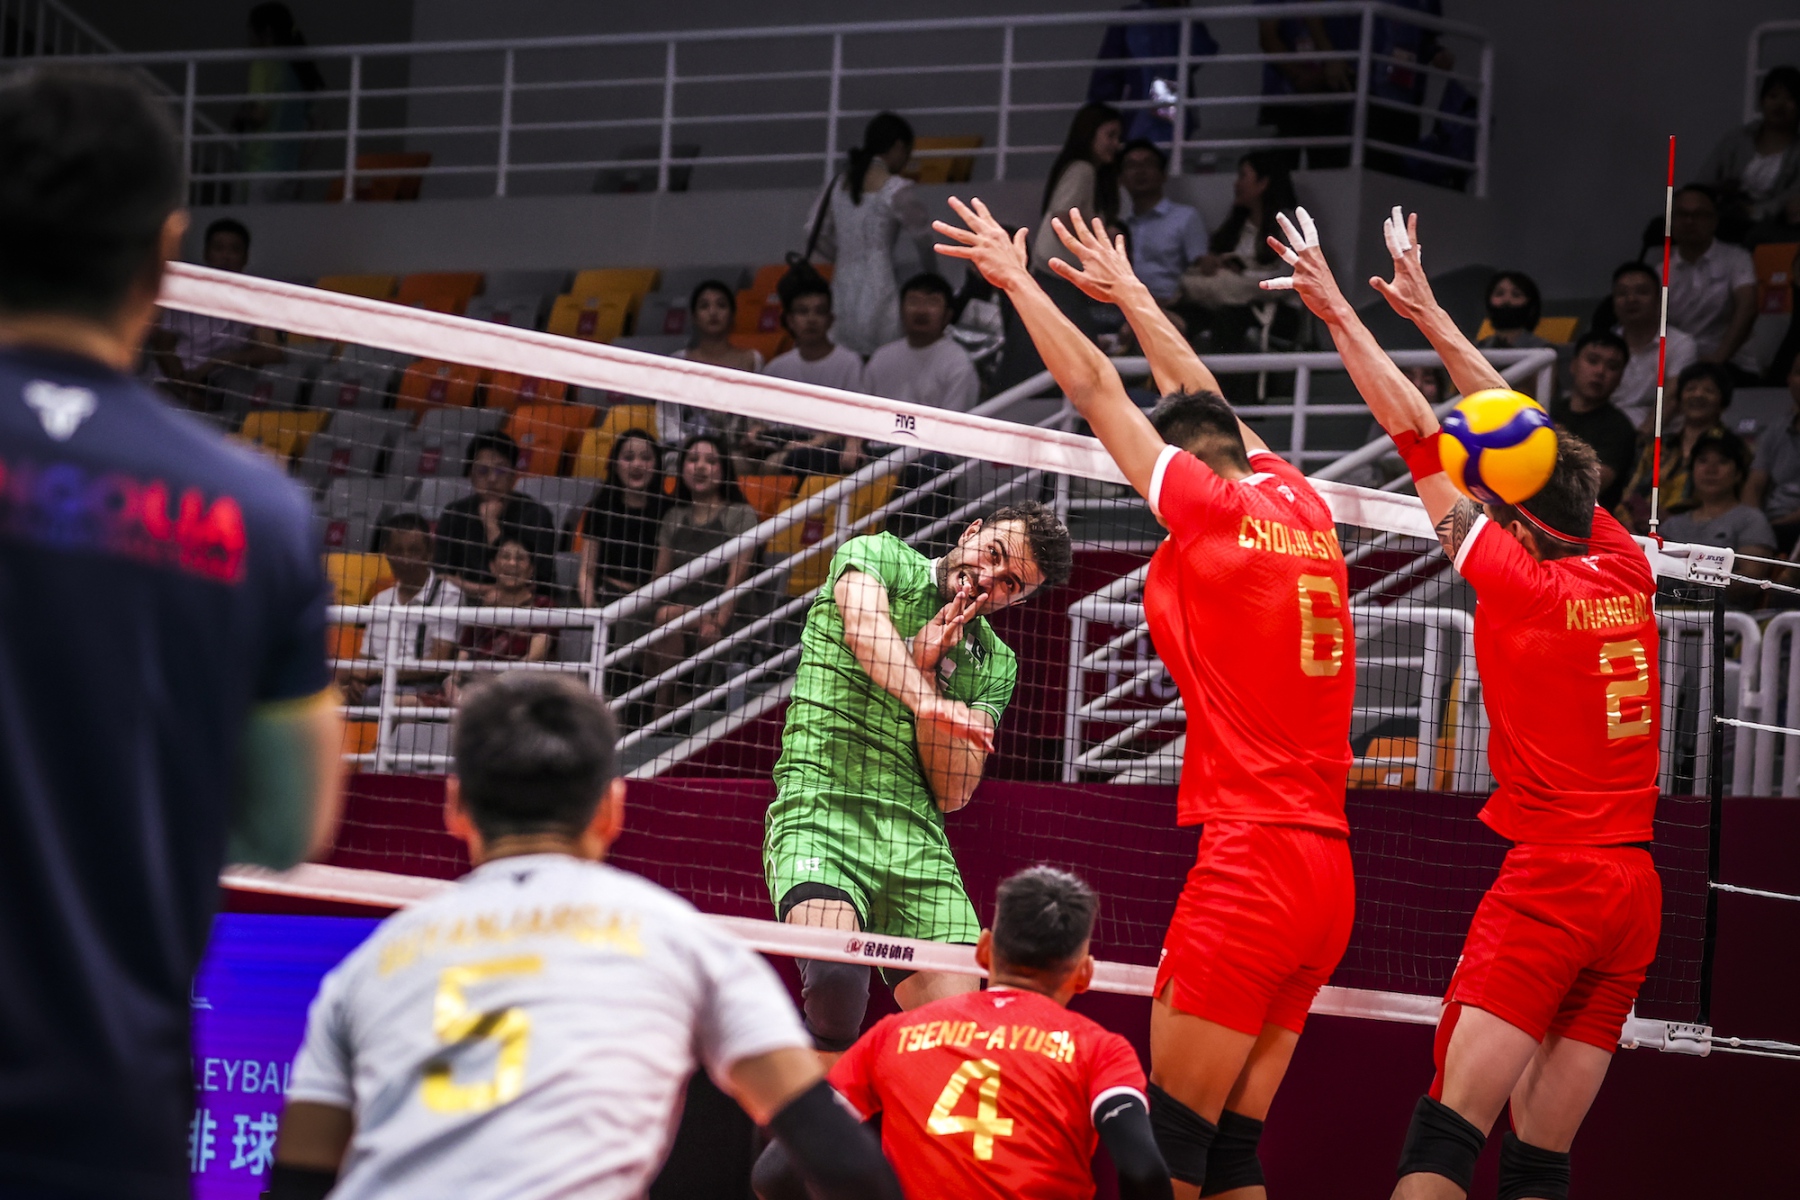 JAPAN, THAILAND, INDONESIA, INDIA, PAKISTAN OFF TO STRONG STARTS WITH CONVINCING STRAIGHT-SET WINS IN 19TH ASIAN GAMES HANGZHOU 2022 MENS VOLLEYBALL COMPETITION